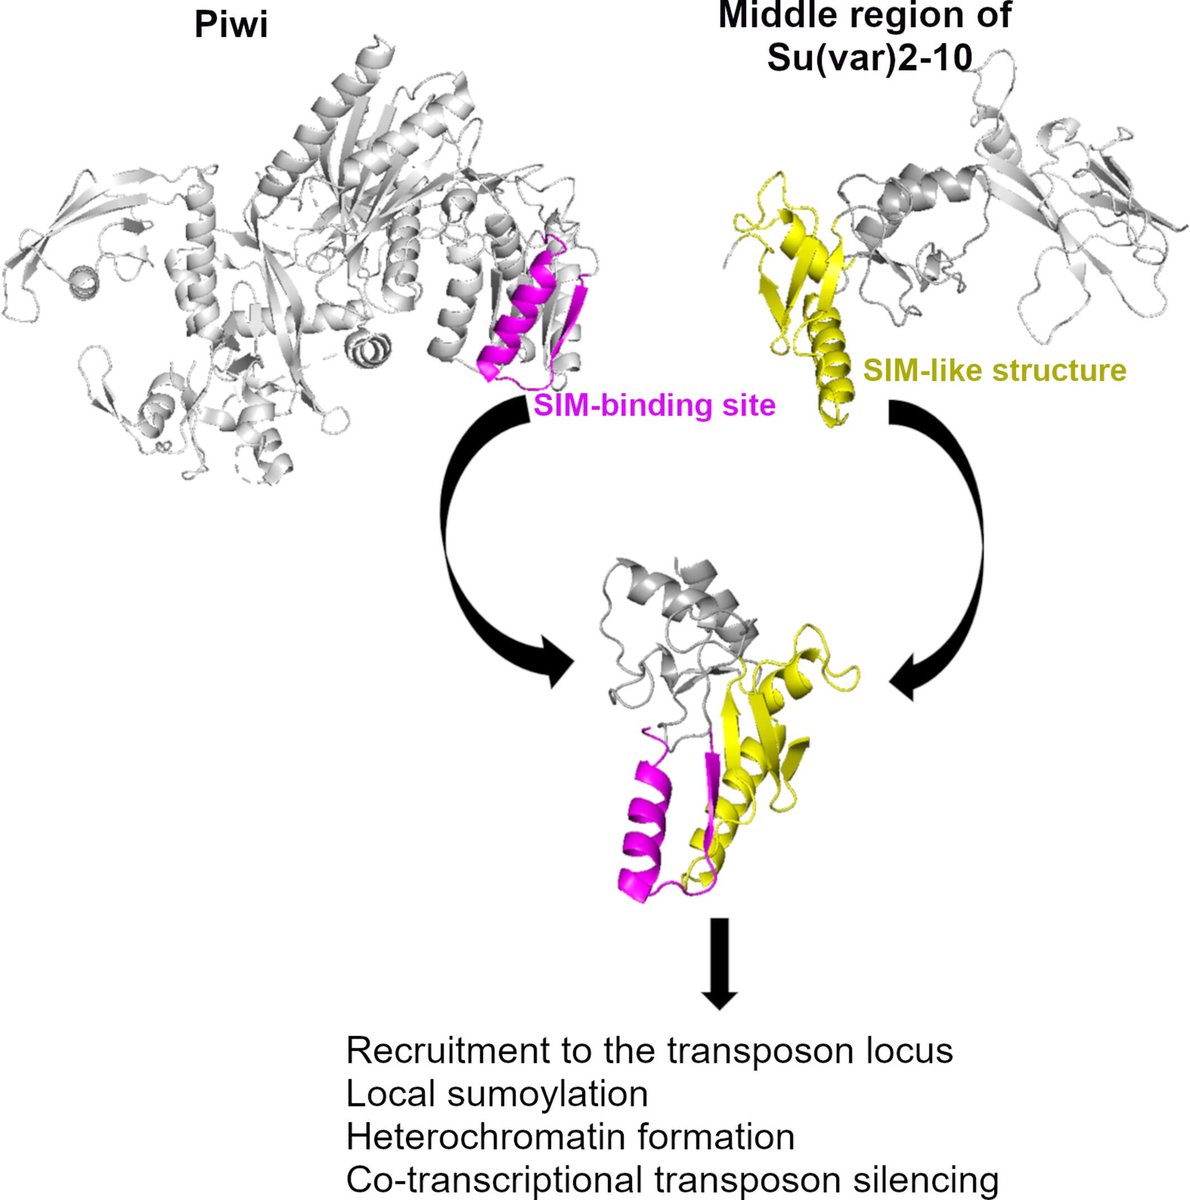 🪰Erdélyi & team @BiochemBrc propose a model in which Piwi initiates local #sumoylation in the silencing complex, thus contributing to transcriptional silencing of #TransposableElements in #Drosophila: 🪰buff.ly/4aMqjlD #OpenAccess #GeneExpression